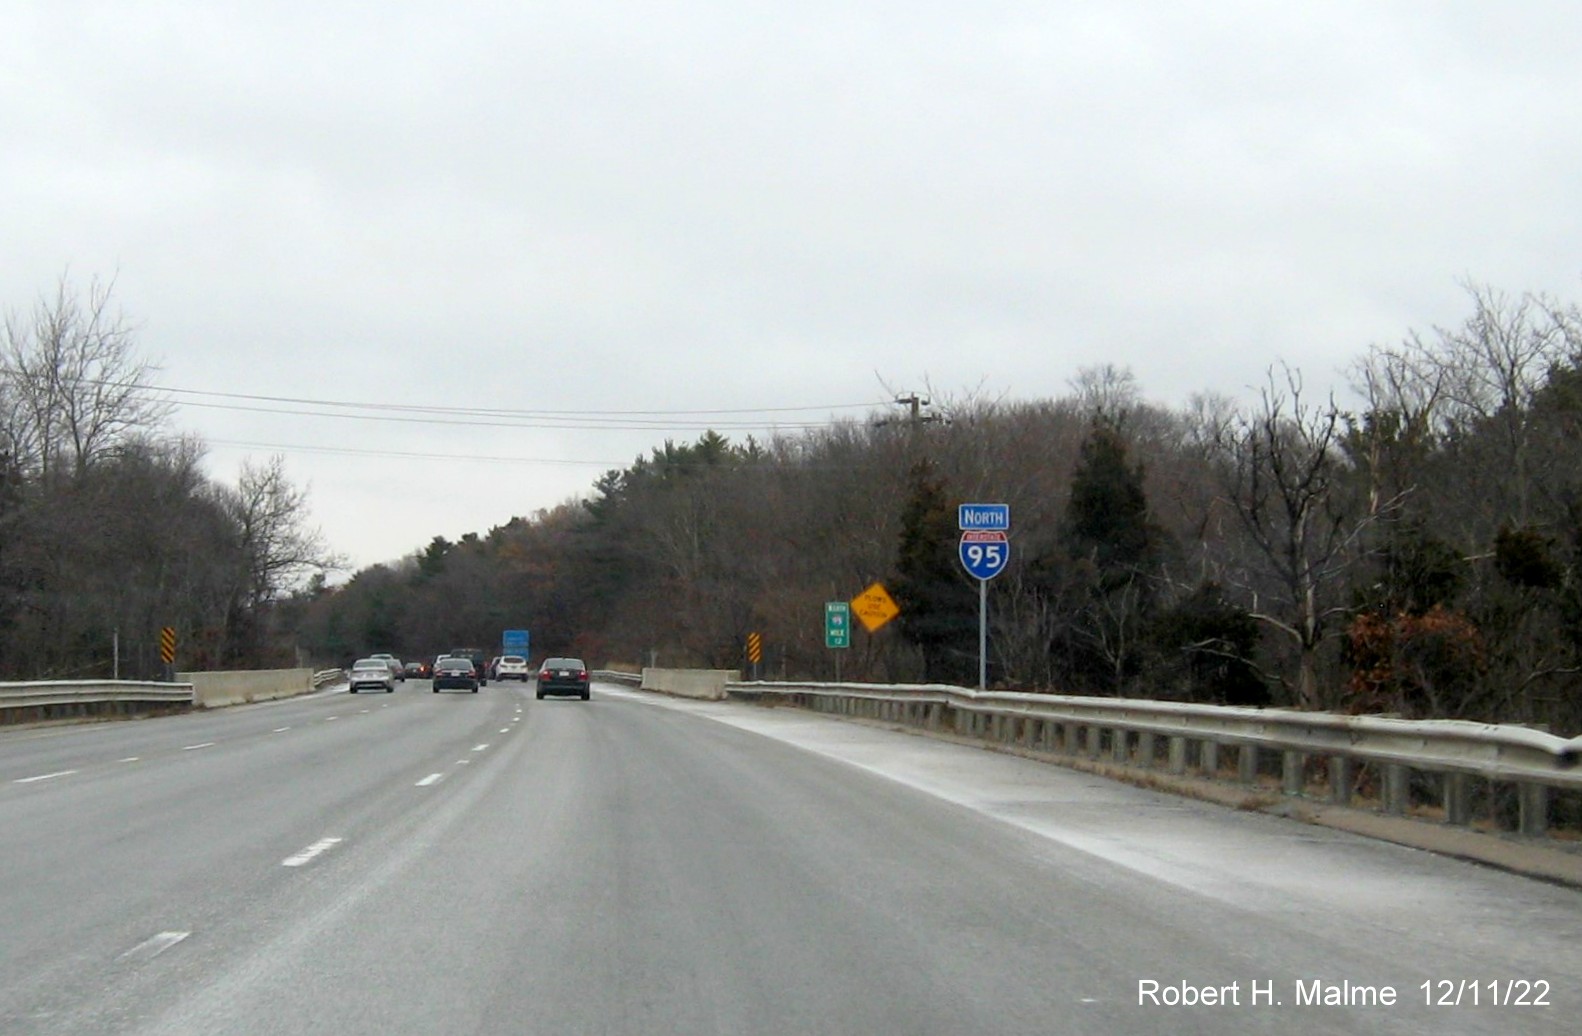 Image of newly placed I-95 North reassurance marker in Foxboro, December 2022